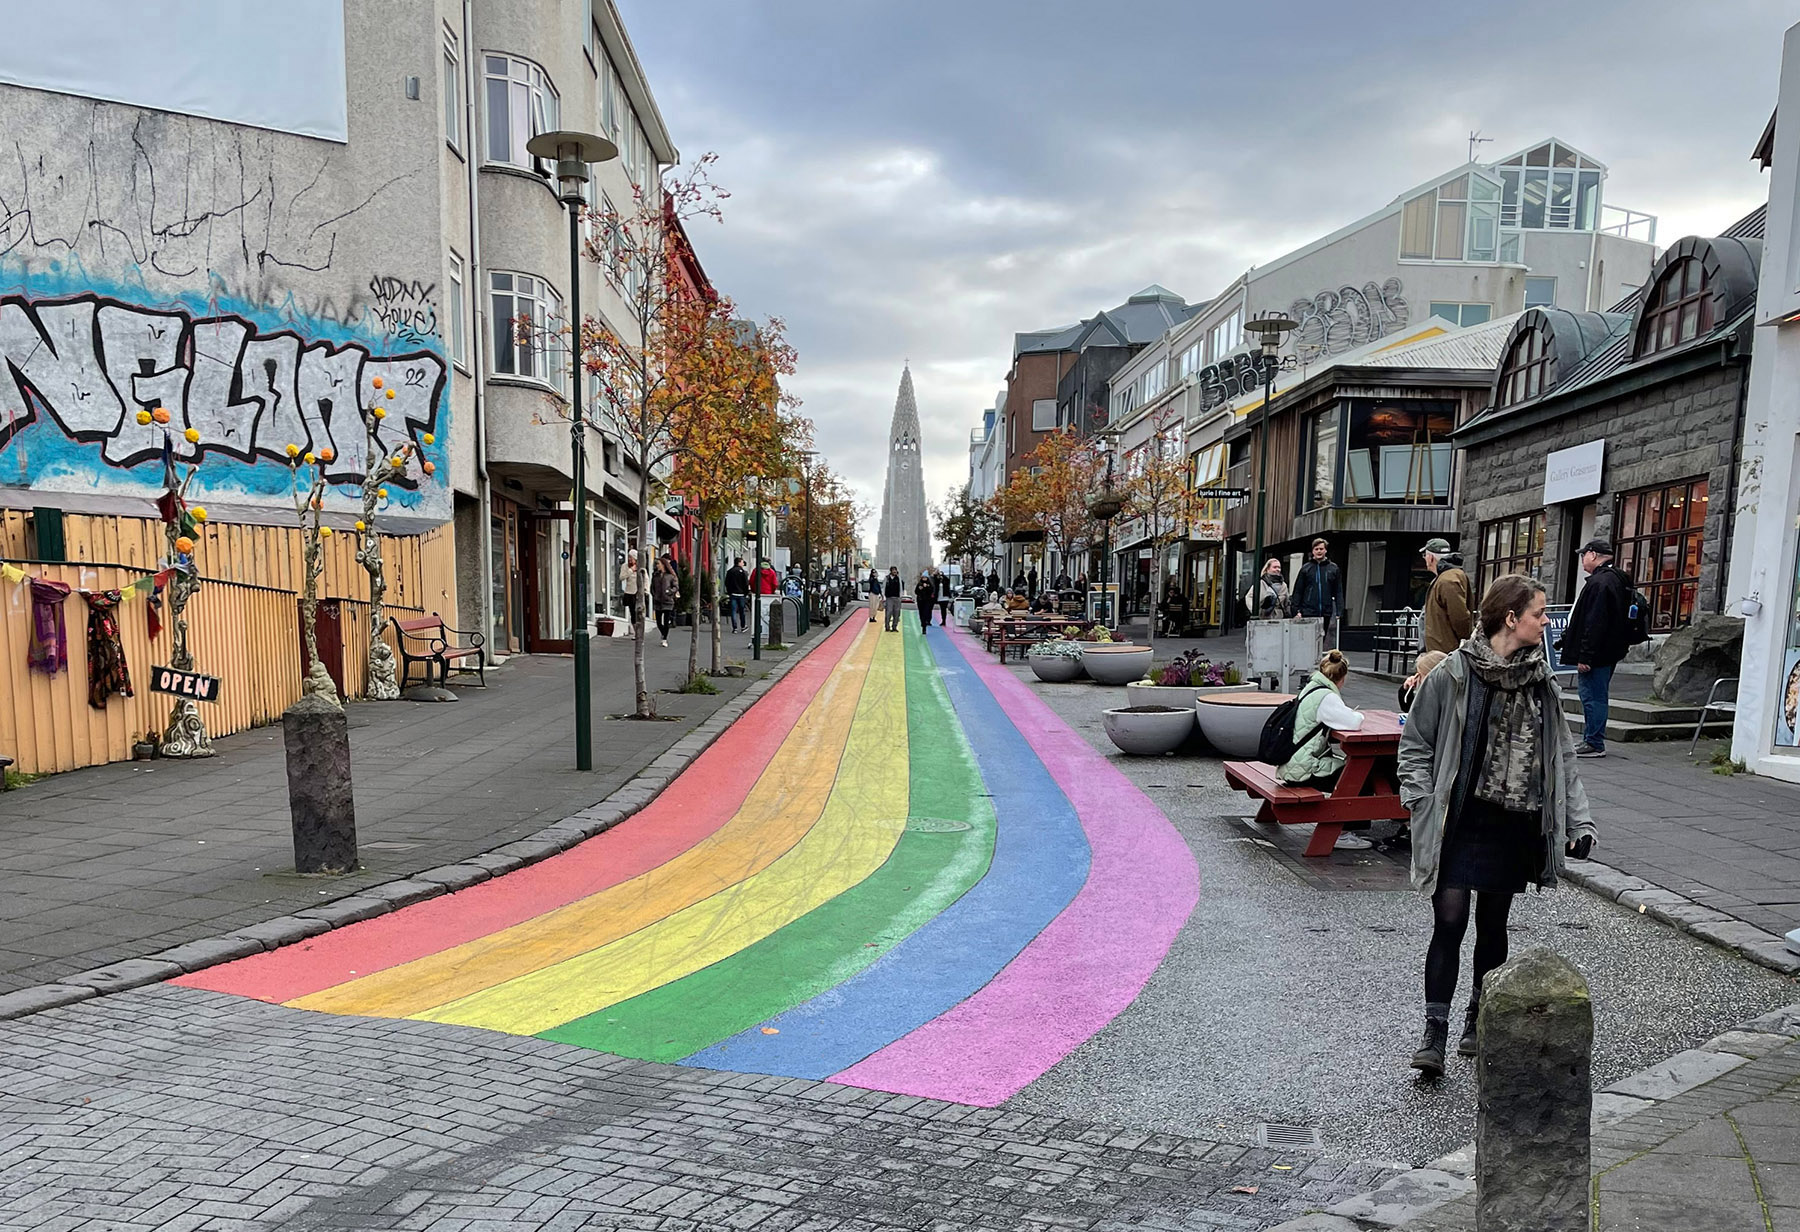 Skólavörðustígur is one of the main streets for shopping, dining and hanging out on the sidewalk, drinking tea/coffee/beer and watching the world go by.   The rainbow flag painted on the most famous street in Reykjavik provides a contrast to Florida’s “Don’t say gay” law.  Photo by Joan Castleman.